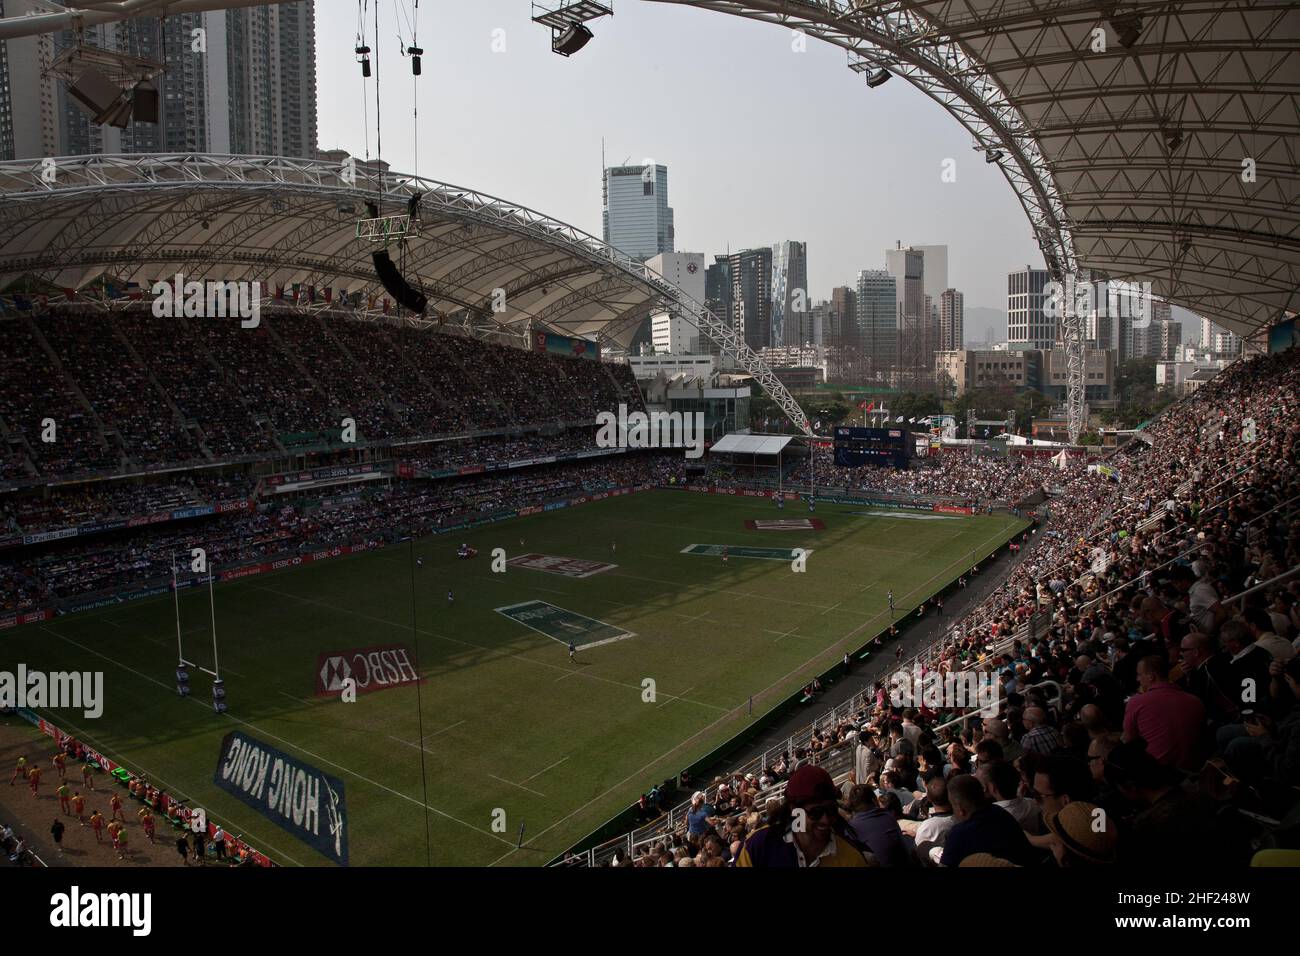 The crowd, at the Hong Kong Stadium, during the Hong Kong Sevens. It is considered the most important 7s rugby tournament in the world. Stock Photo